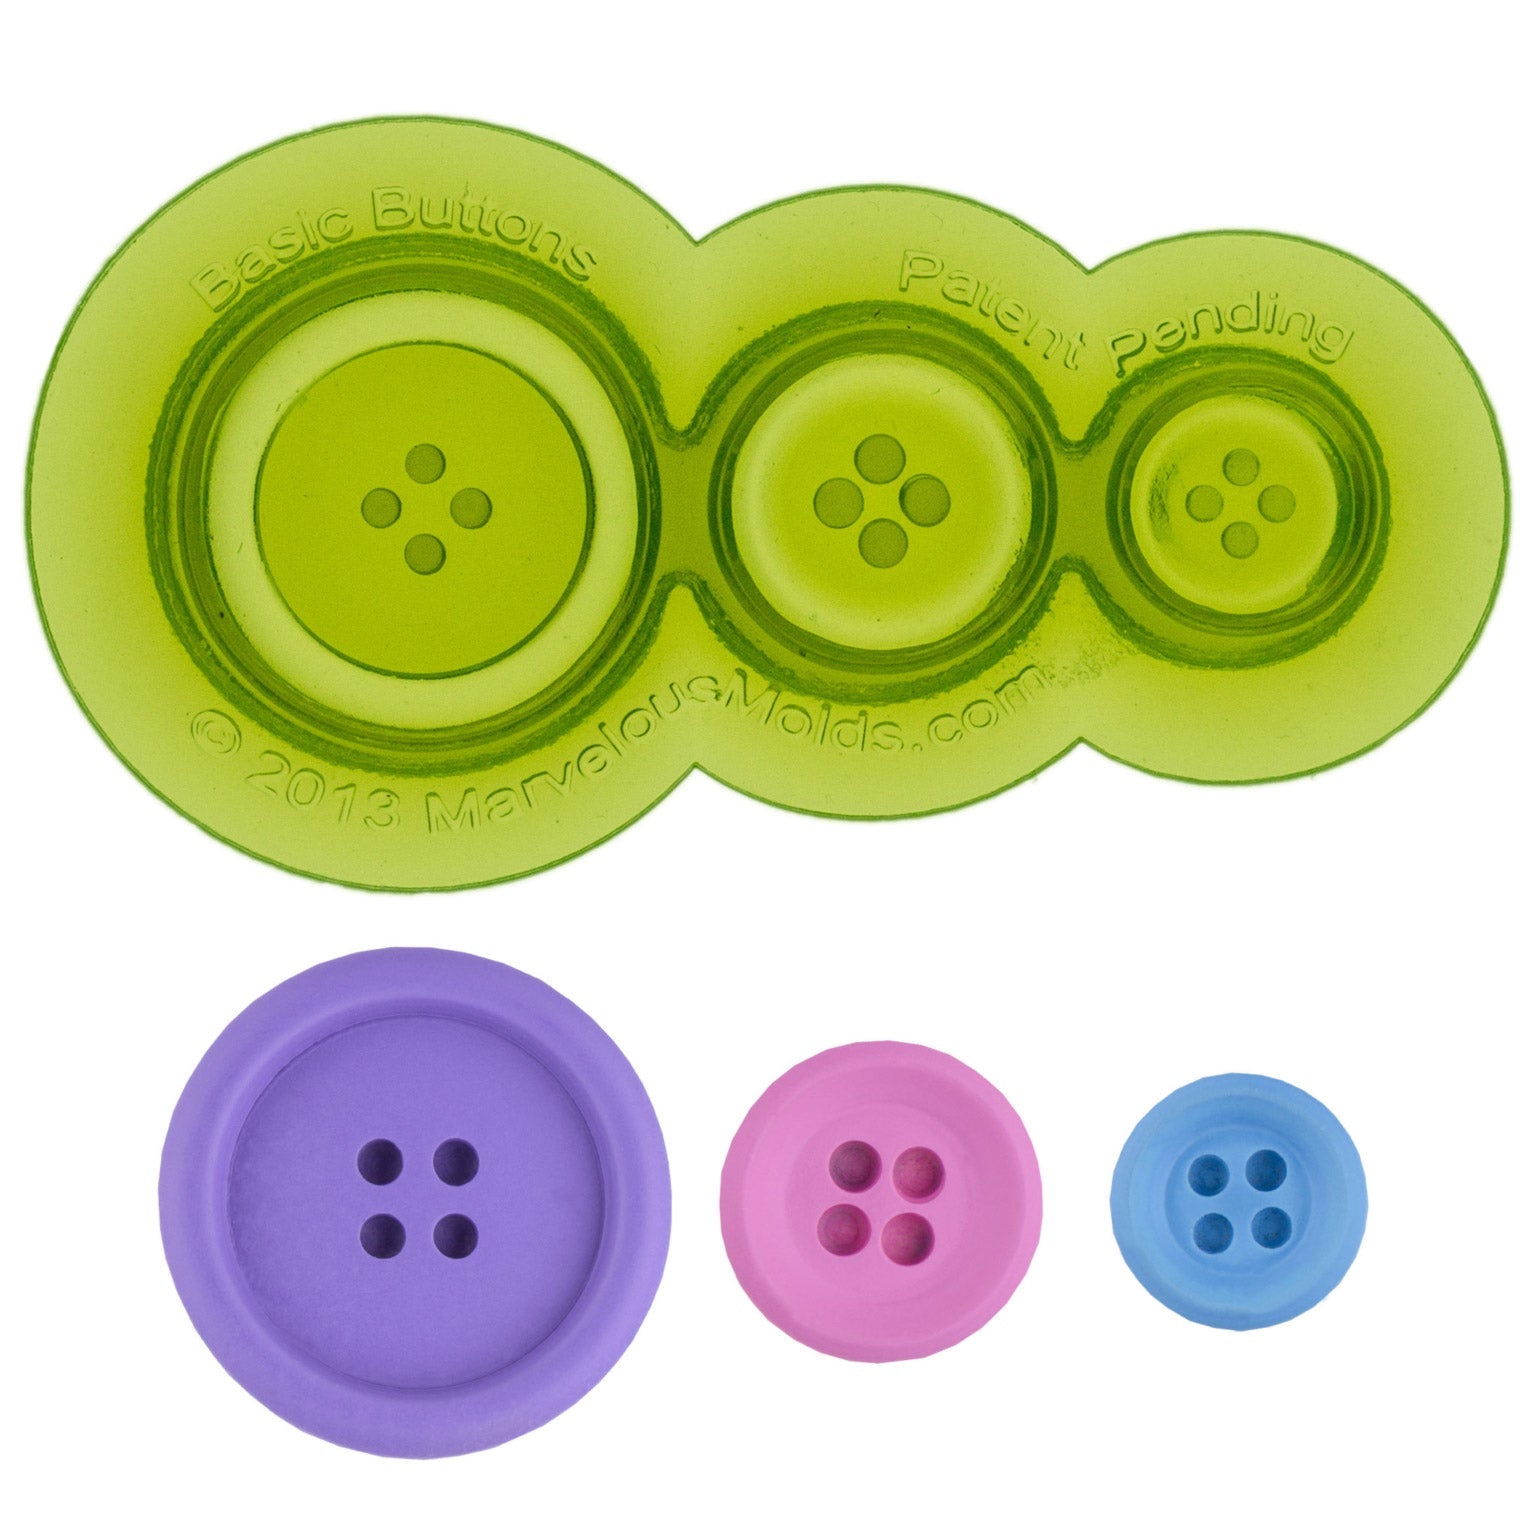 Find Knots Button Mold Marvelous Molds X that is affordable and